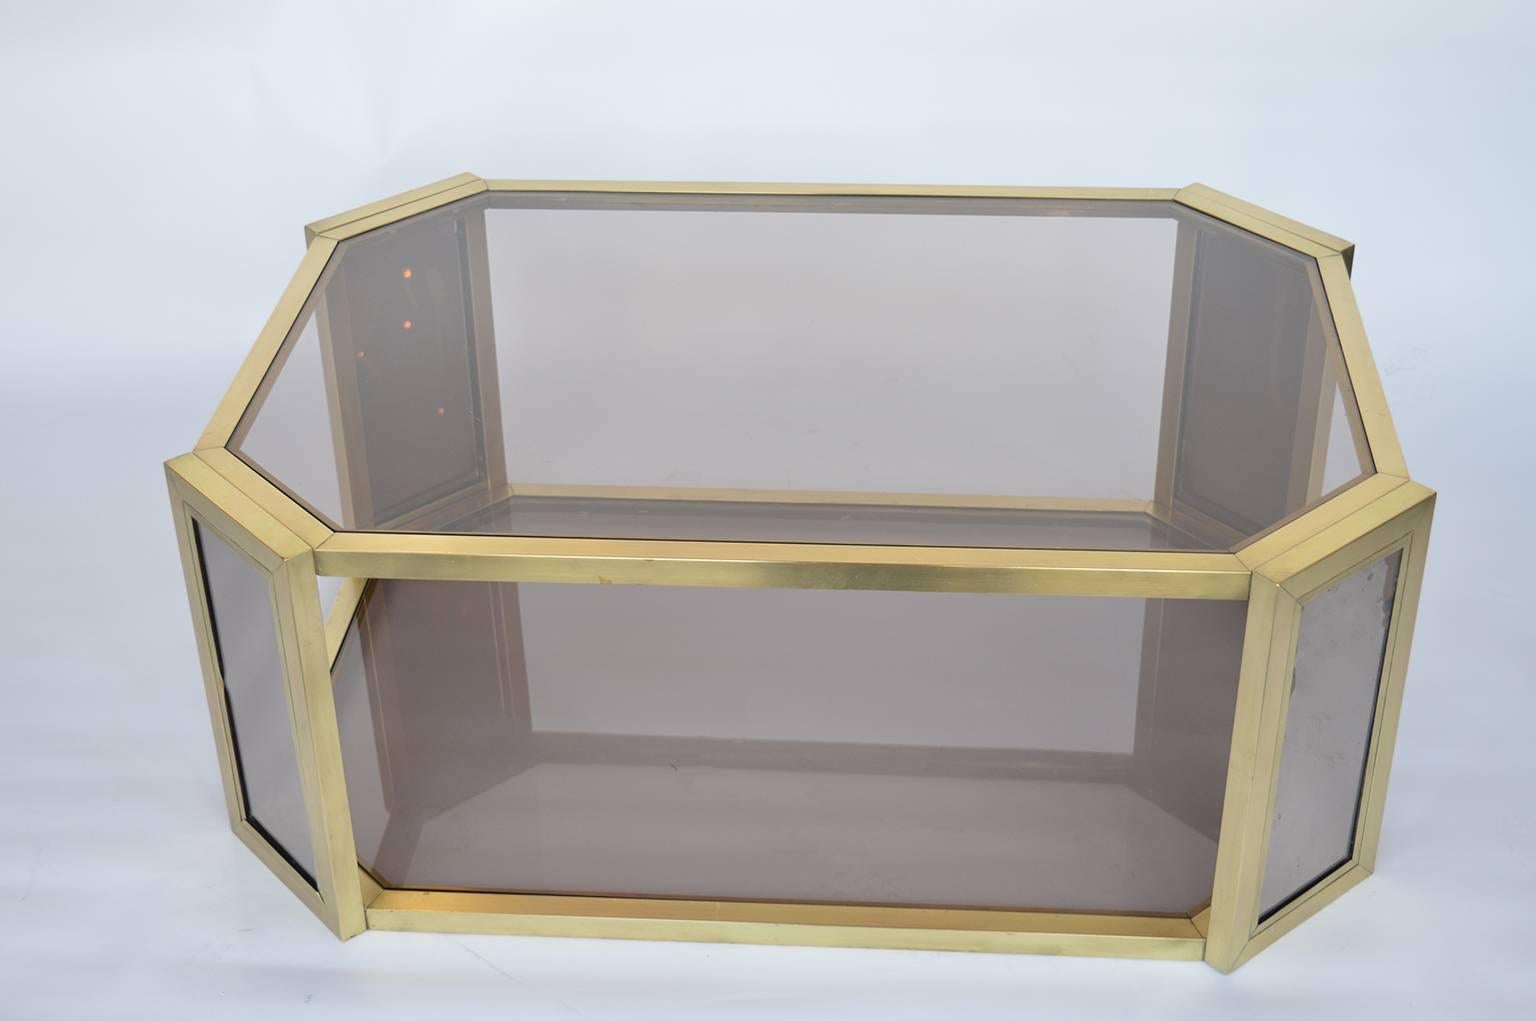 Brass mirrored coffee table. Table has two tiers of a light brown glass, with matching mirrors on the inside and outside of the legs.